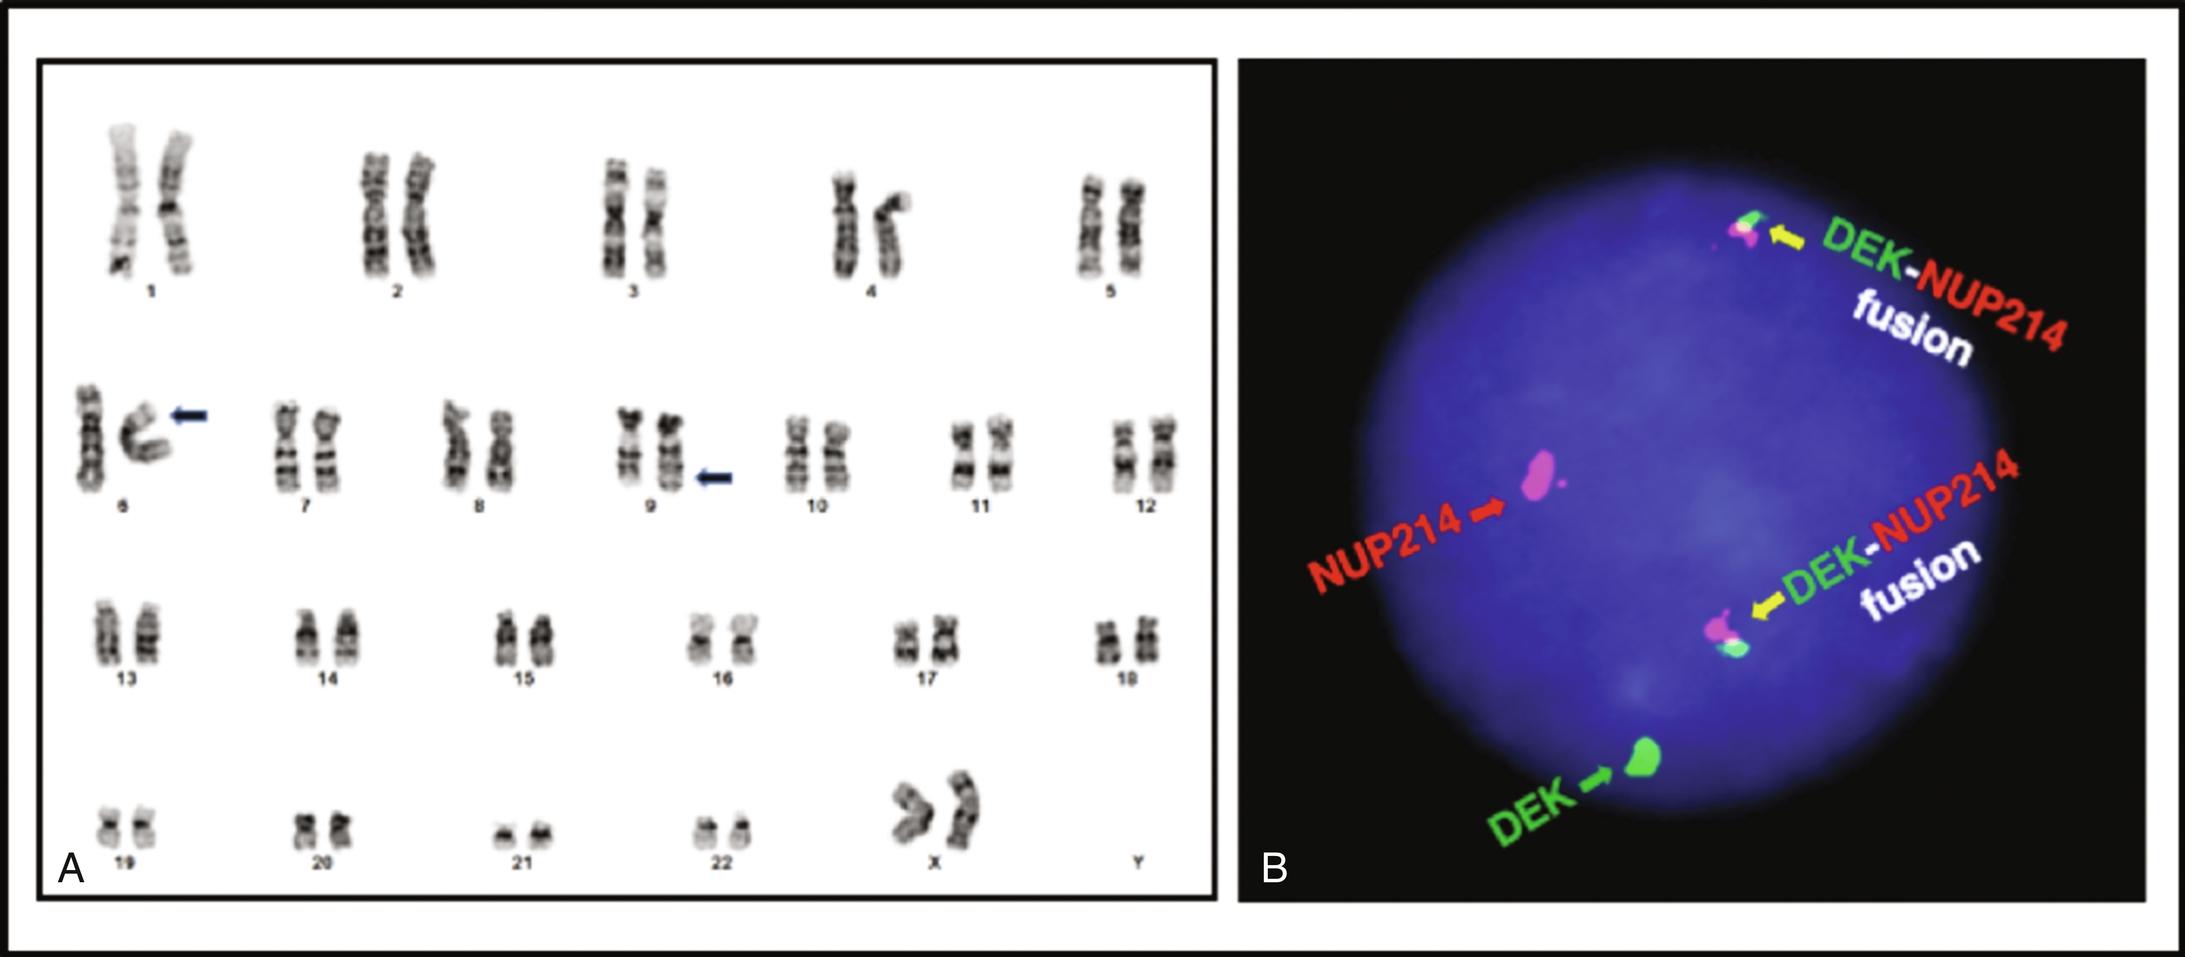 Figure 23.2, (A) Karyotype of an acute myeloid leukemia showing a t(6;9)(p22;q34) translocation ( filled arrows ). (B) Interphase fluorescence in situ hybridization (FISH) of the same specimen with a dual-color DEK-NUP214 fusion probe.